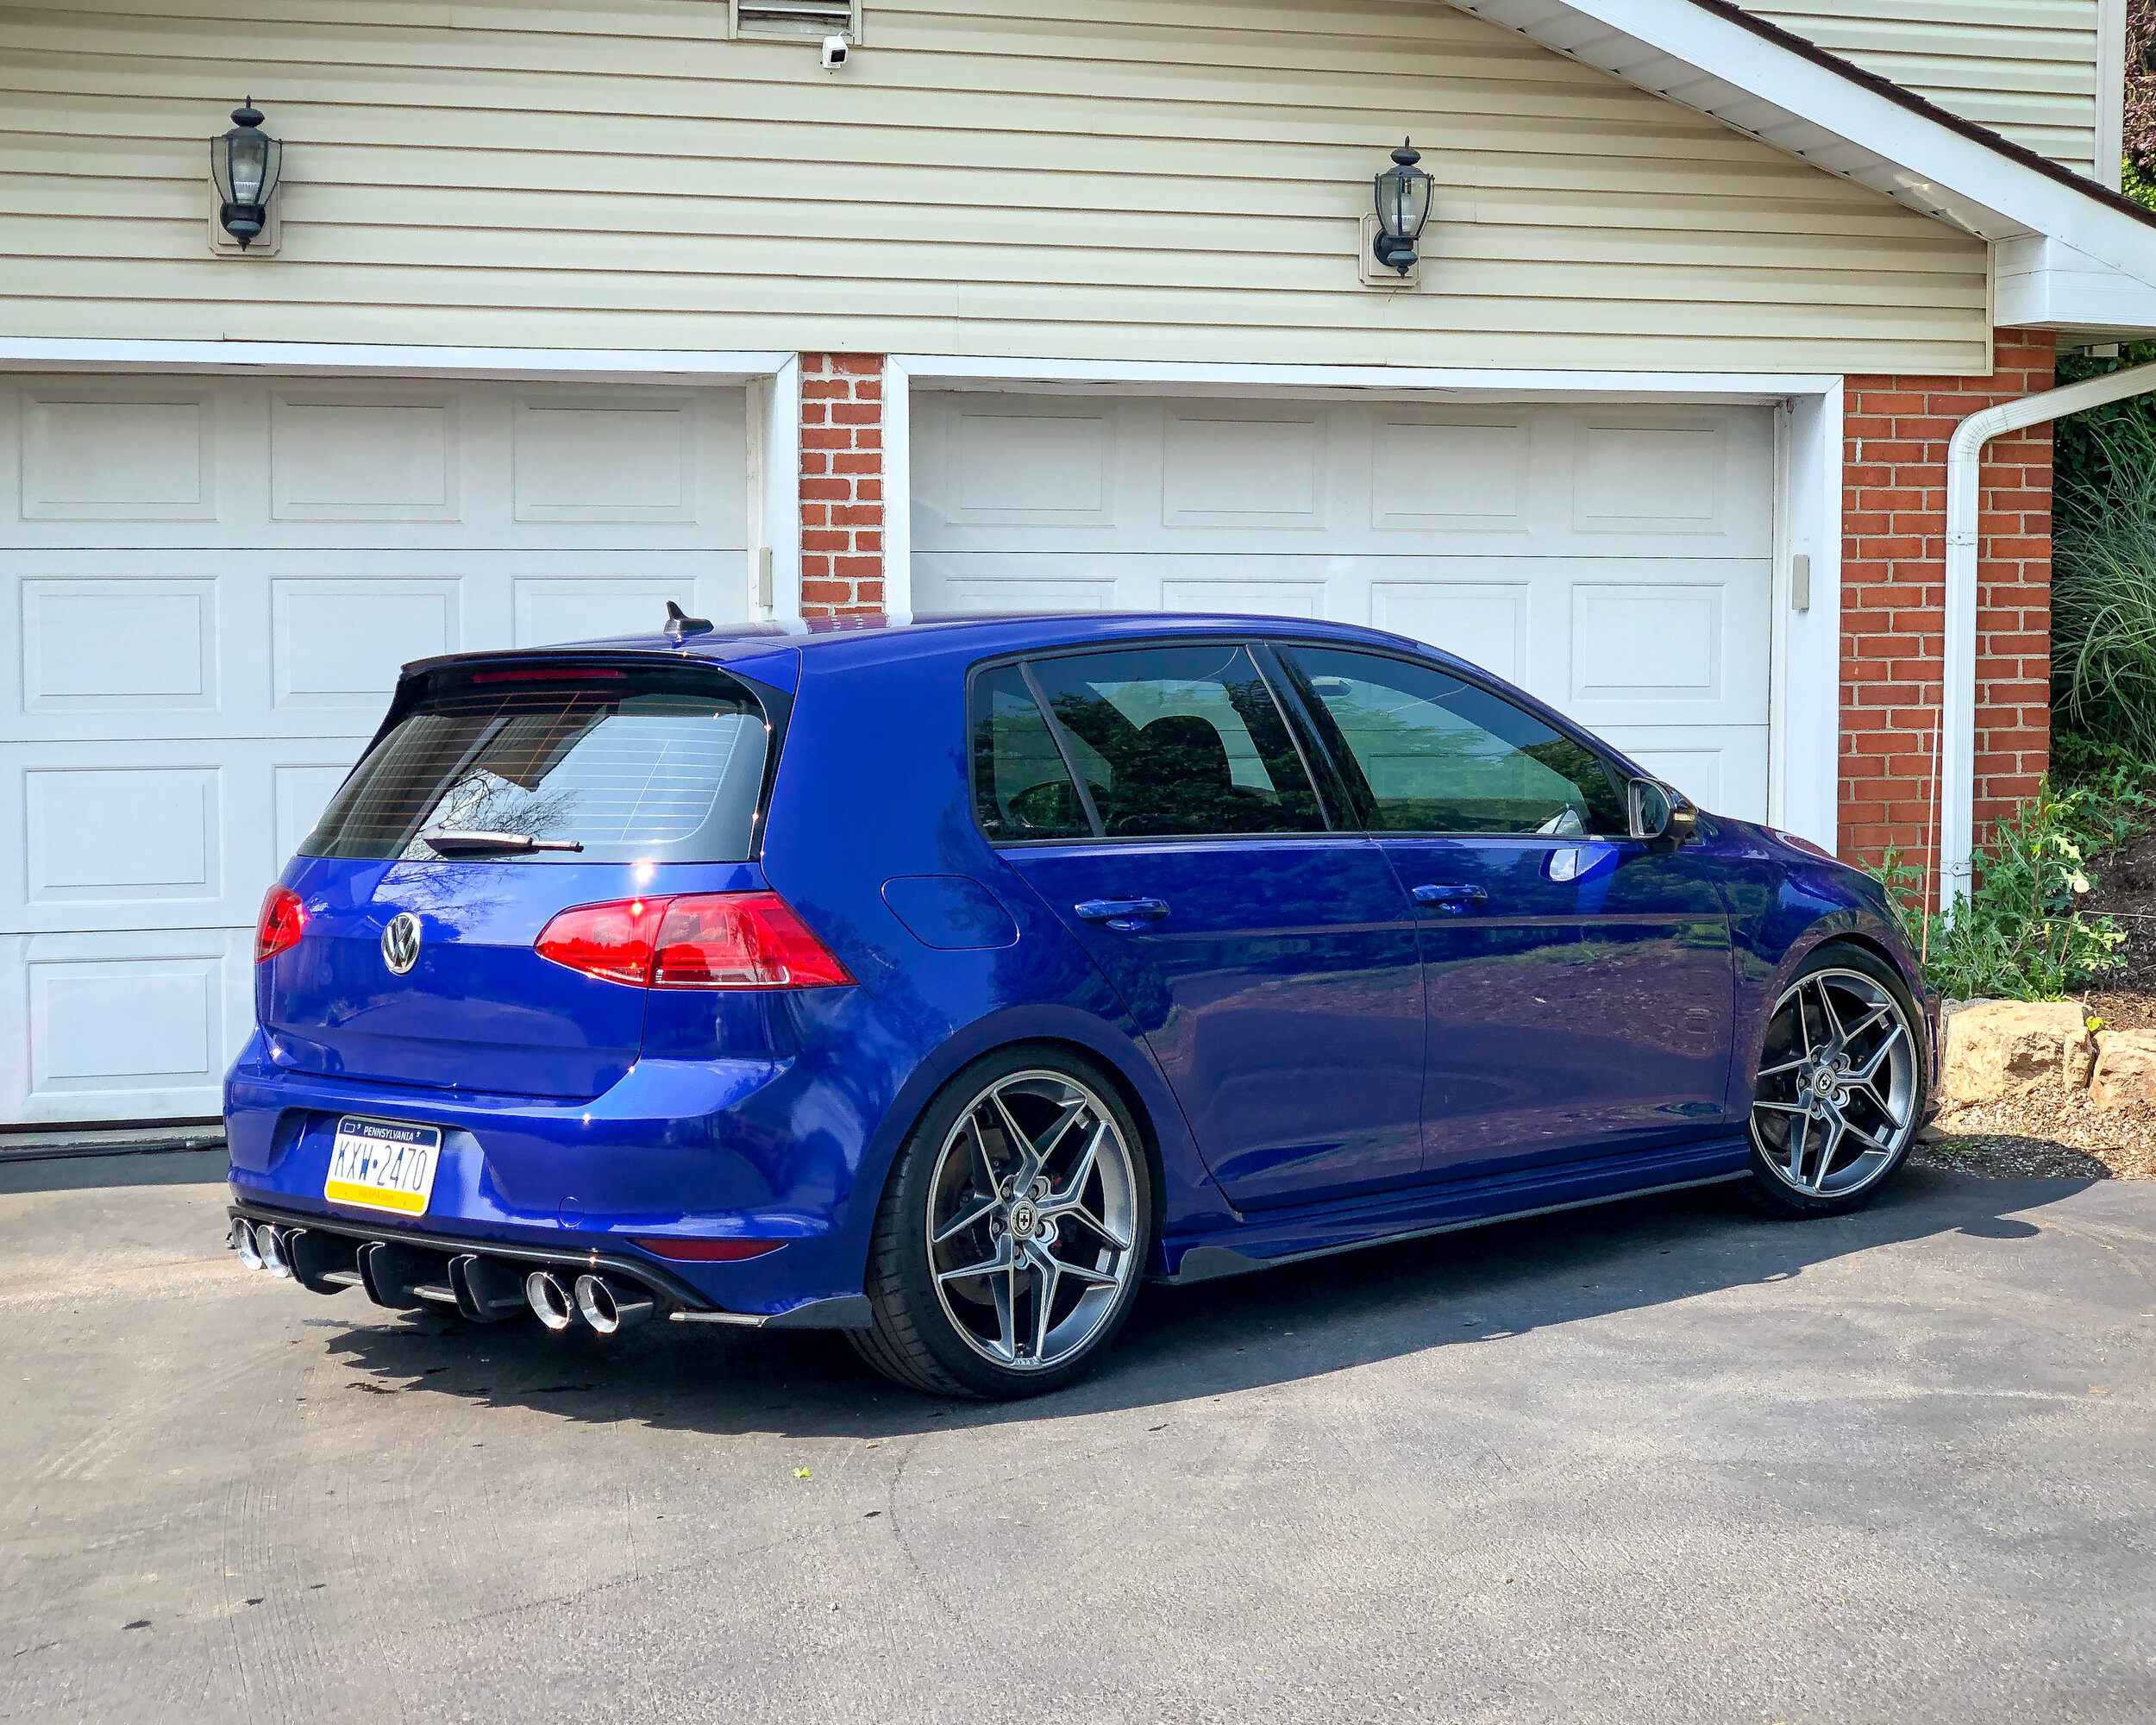 Rinseless wash is amazing : r/GolfGTI